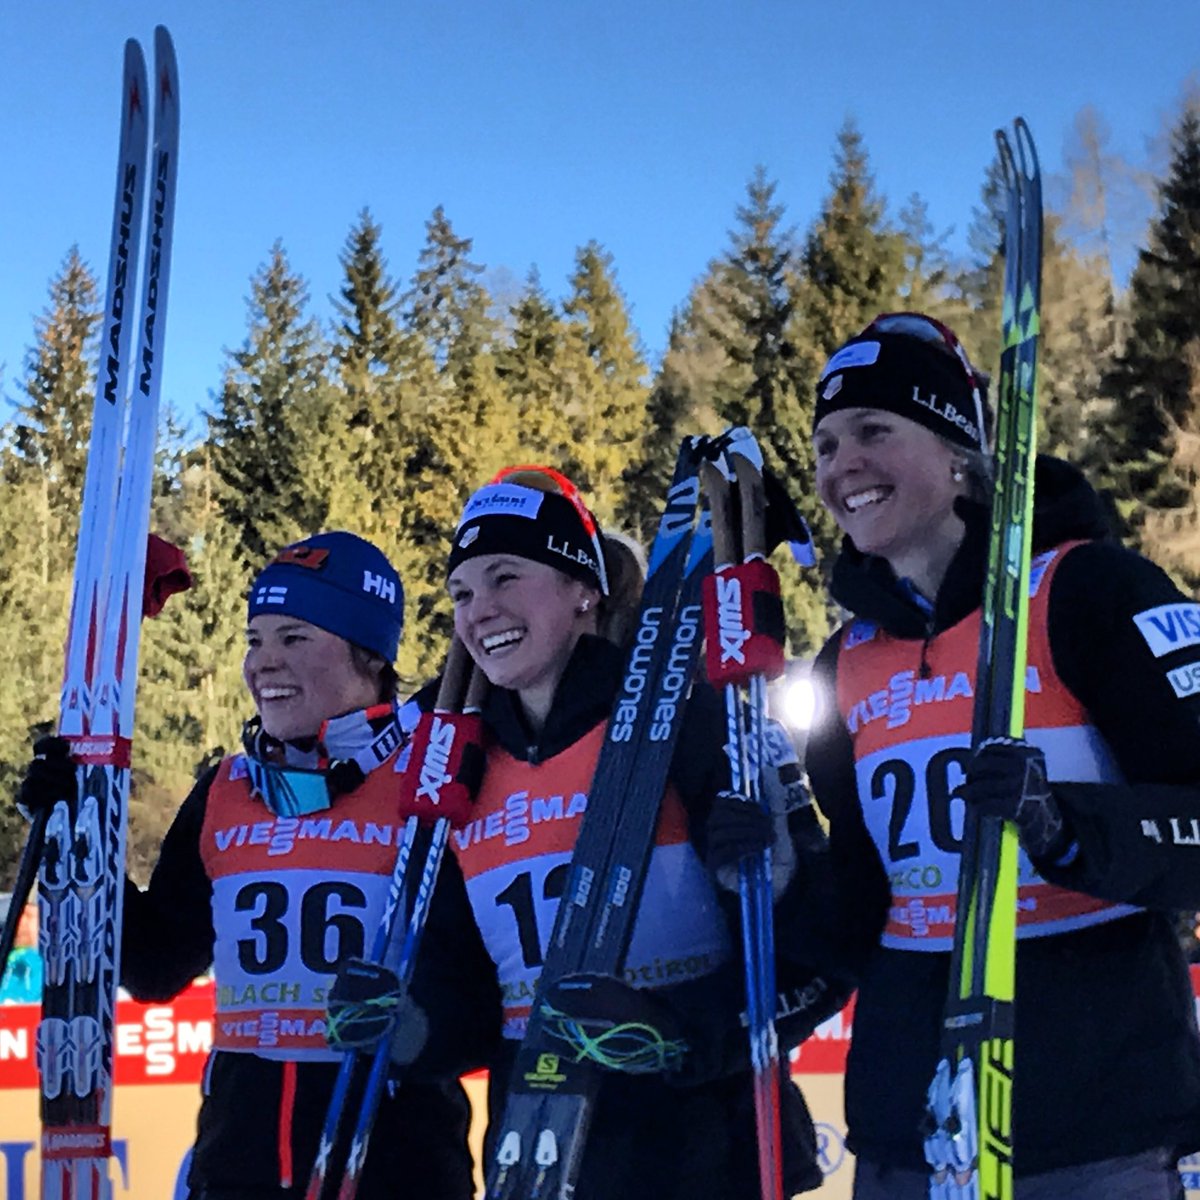 The Tour de Ski Stage 5 women's 5 k freestyle podium on Friday in Toblach, Italy, with two Americans -- Jessie Diggins (c) in first and Sadie Bjornsen (r) in third -- and Finland's Krista Parmakoski (l) in second. (Photo: FIS Cross Country/ Twitter)